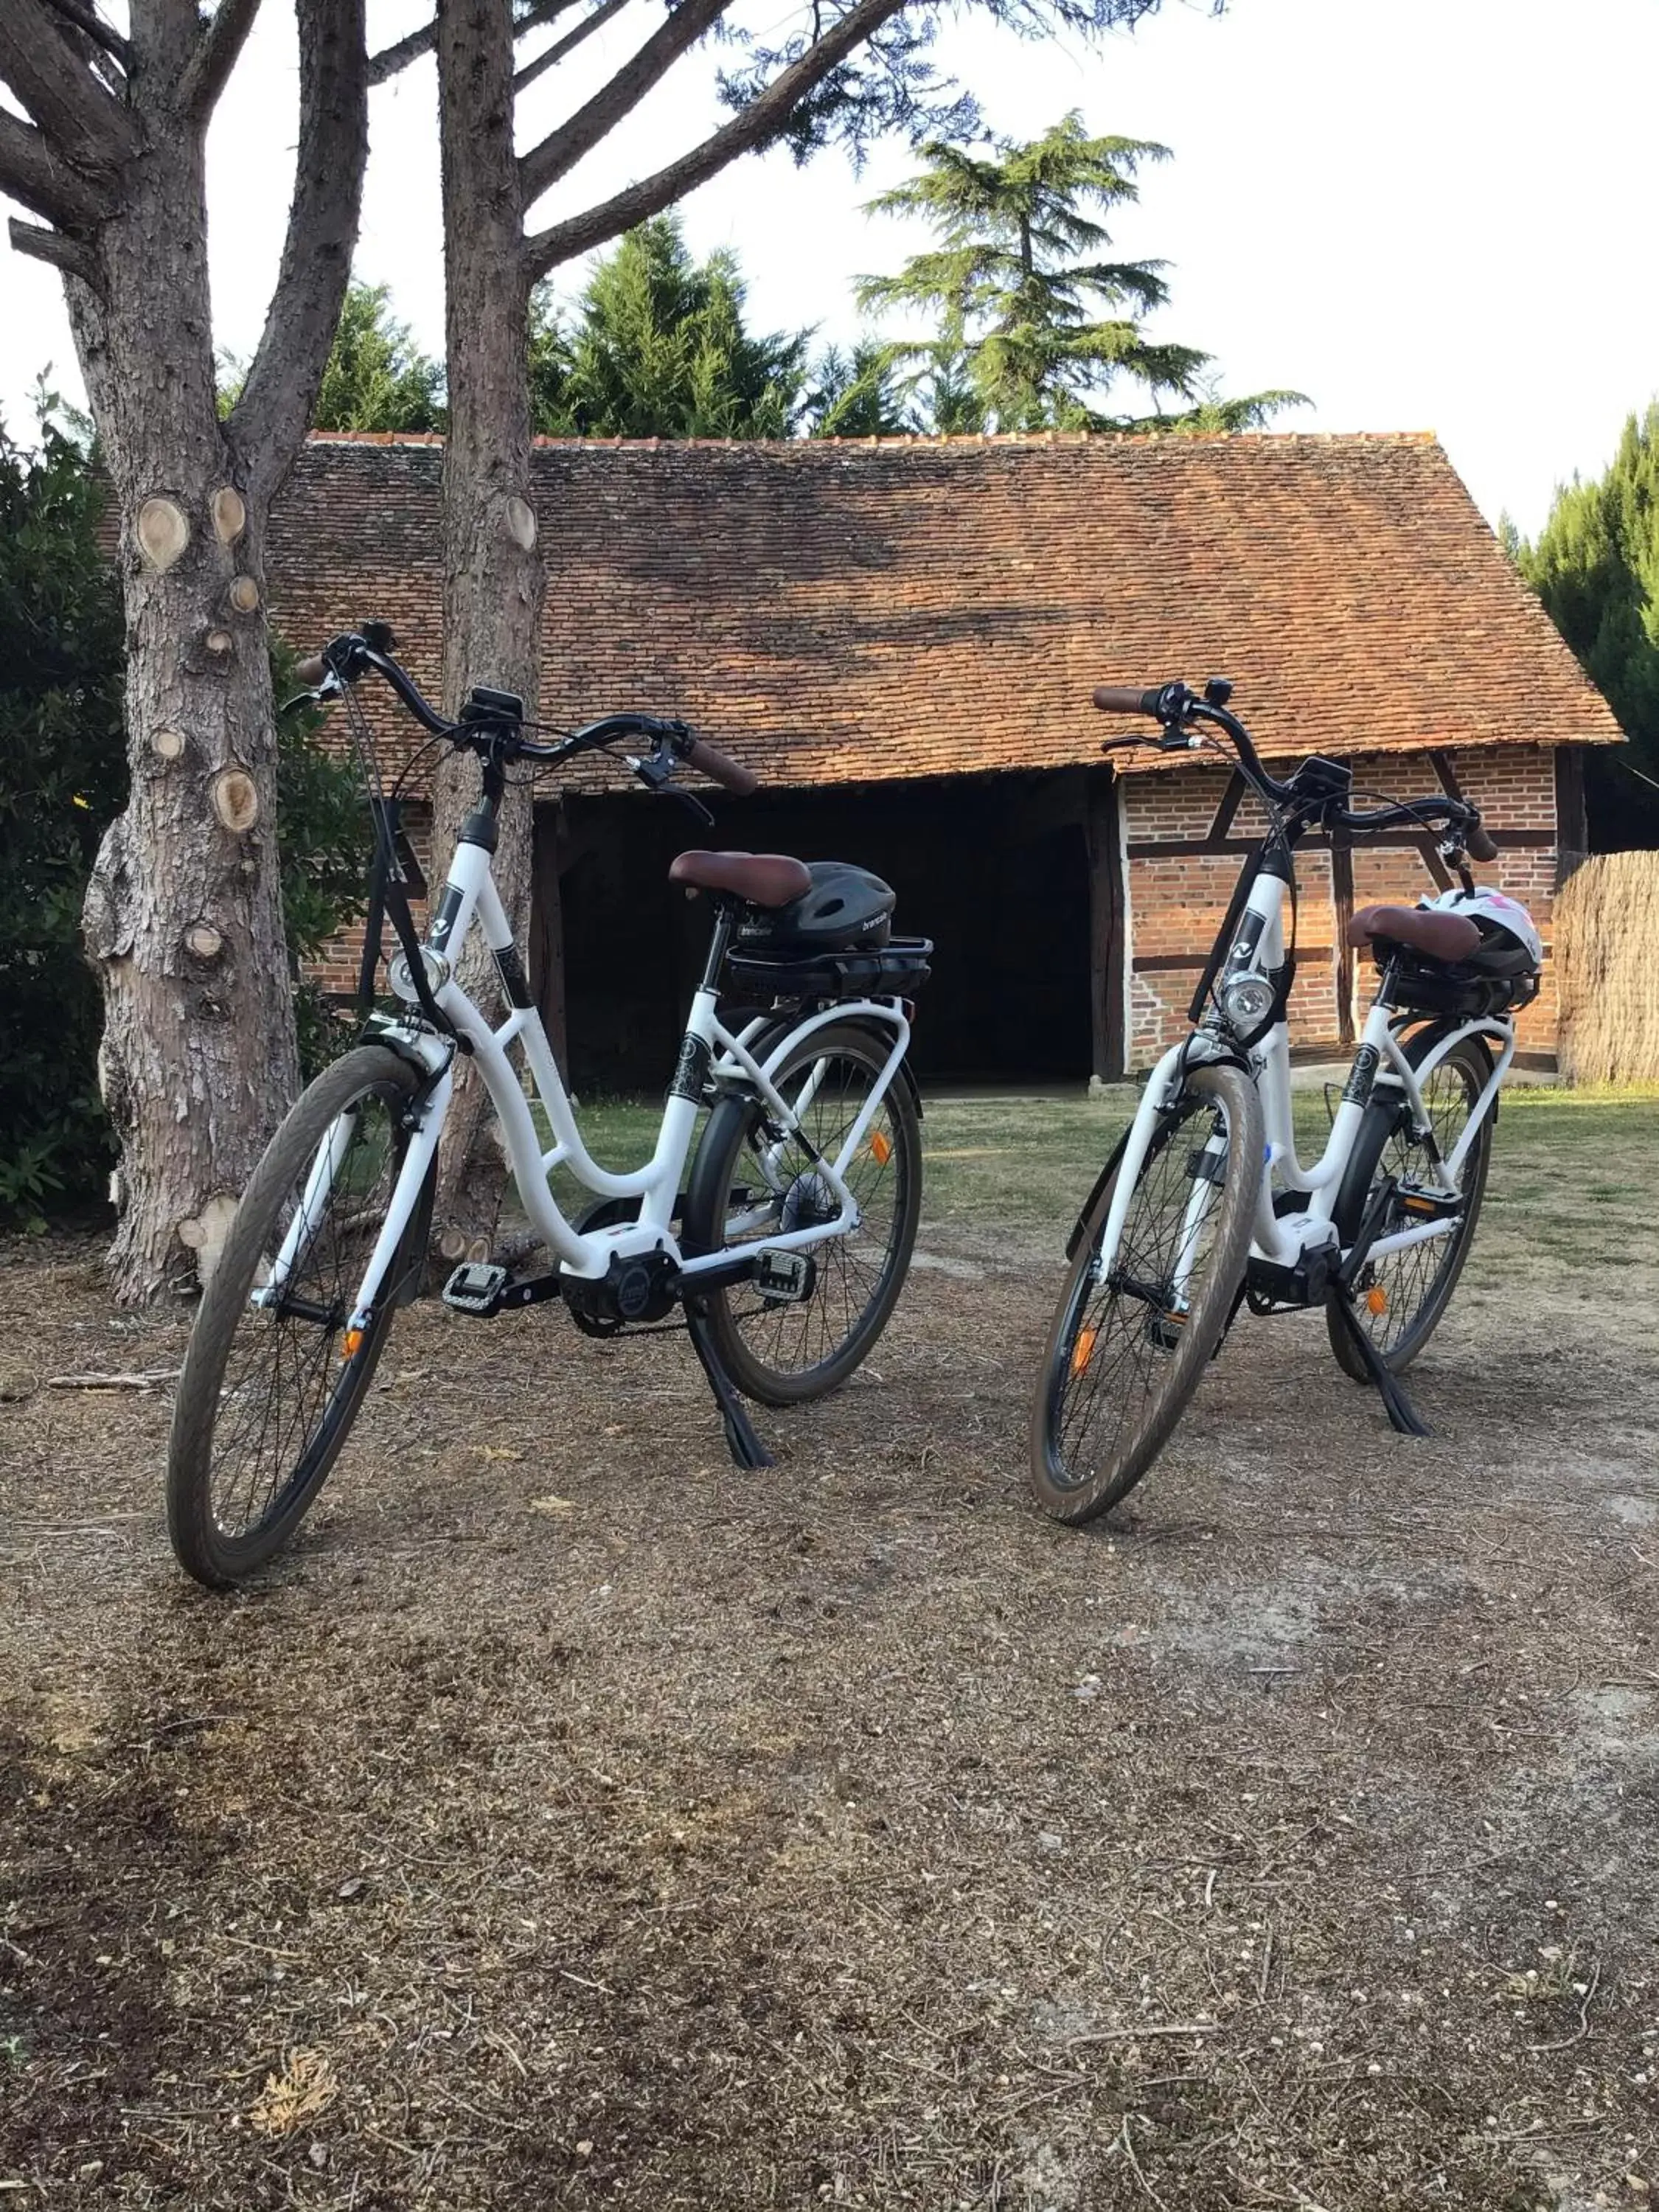 Cycling, Other Activities in Ferme Boisquillon